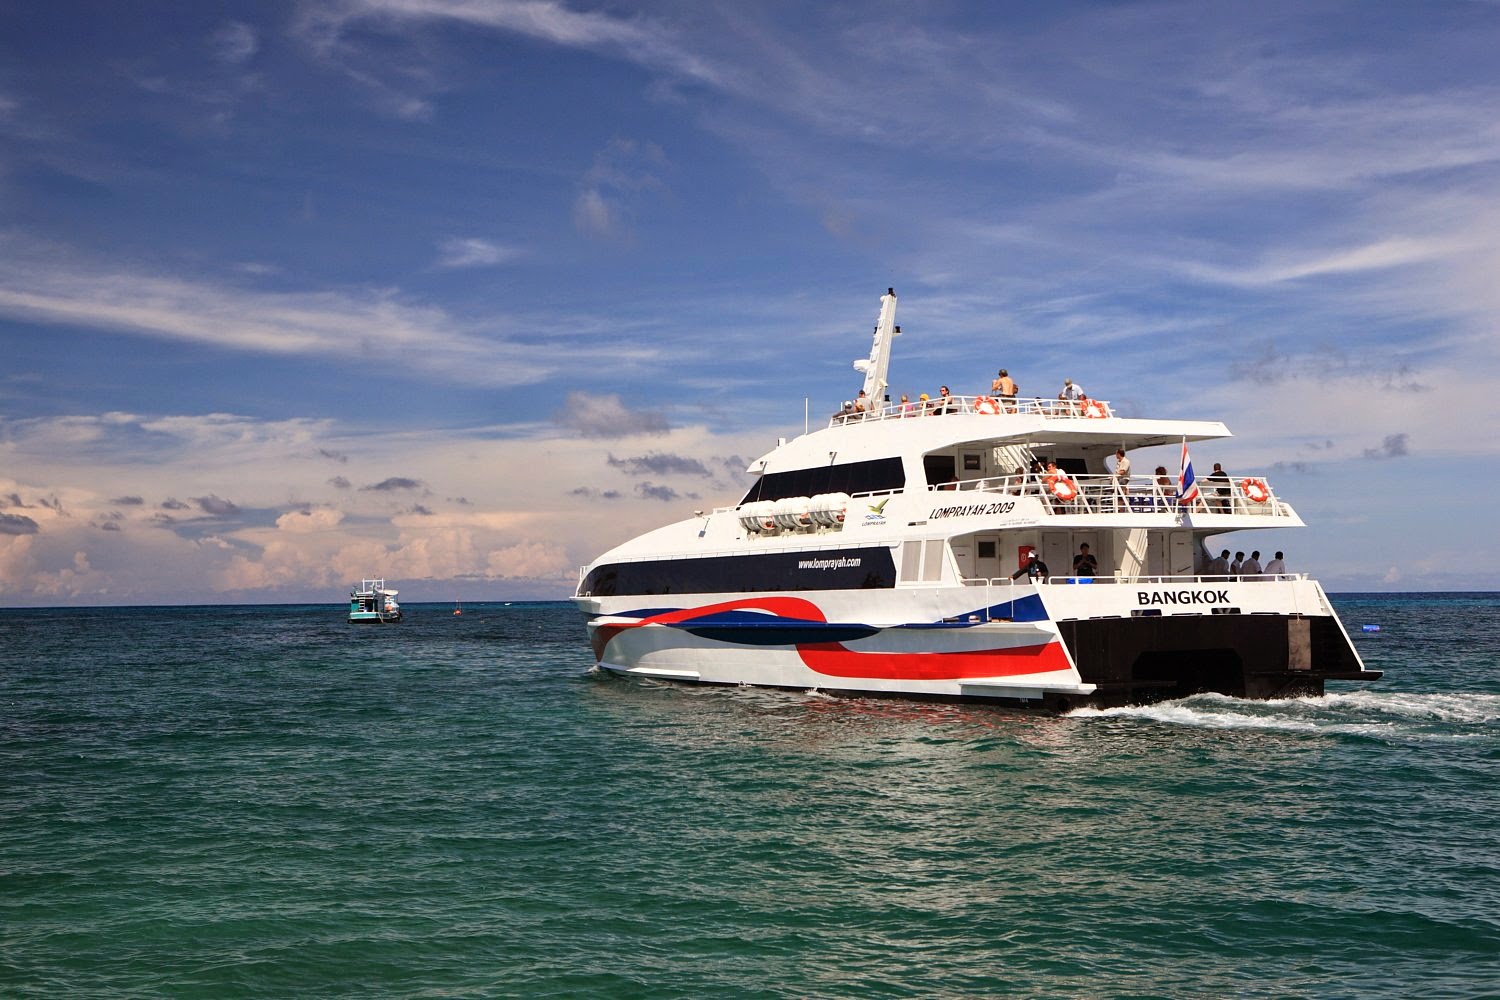 Get to Koh Samui by bus/shuttle bus + ferry - The 3 Best Ways to Get to Koh Samui